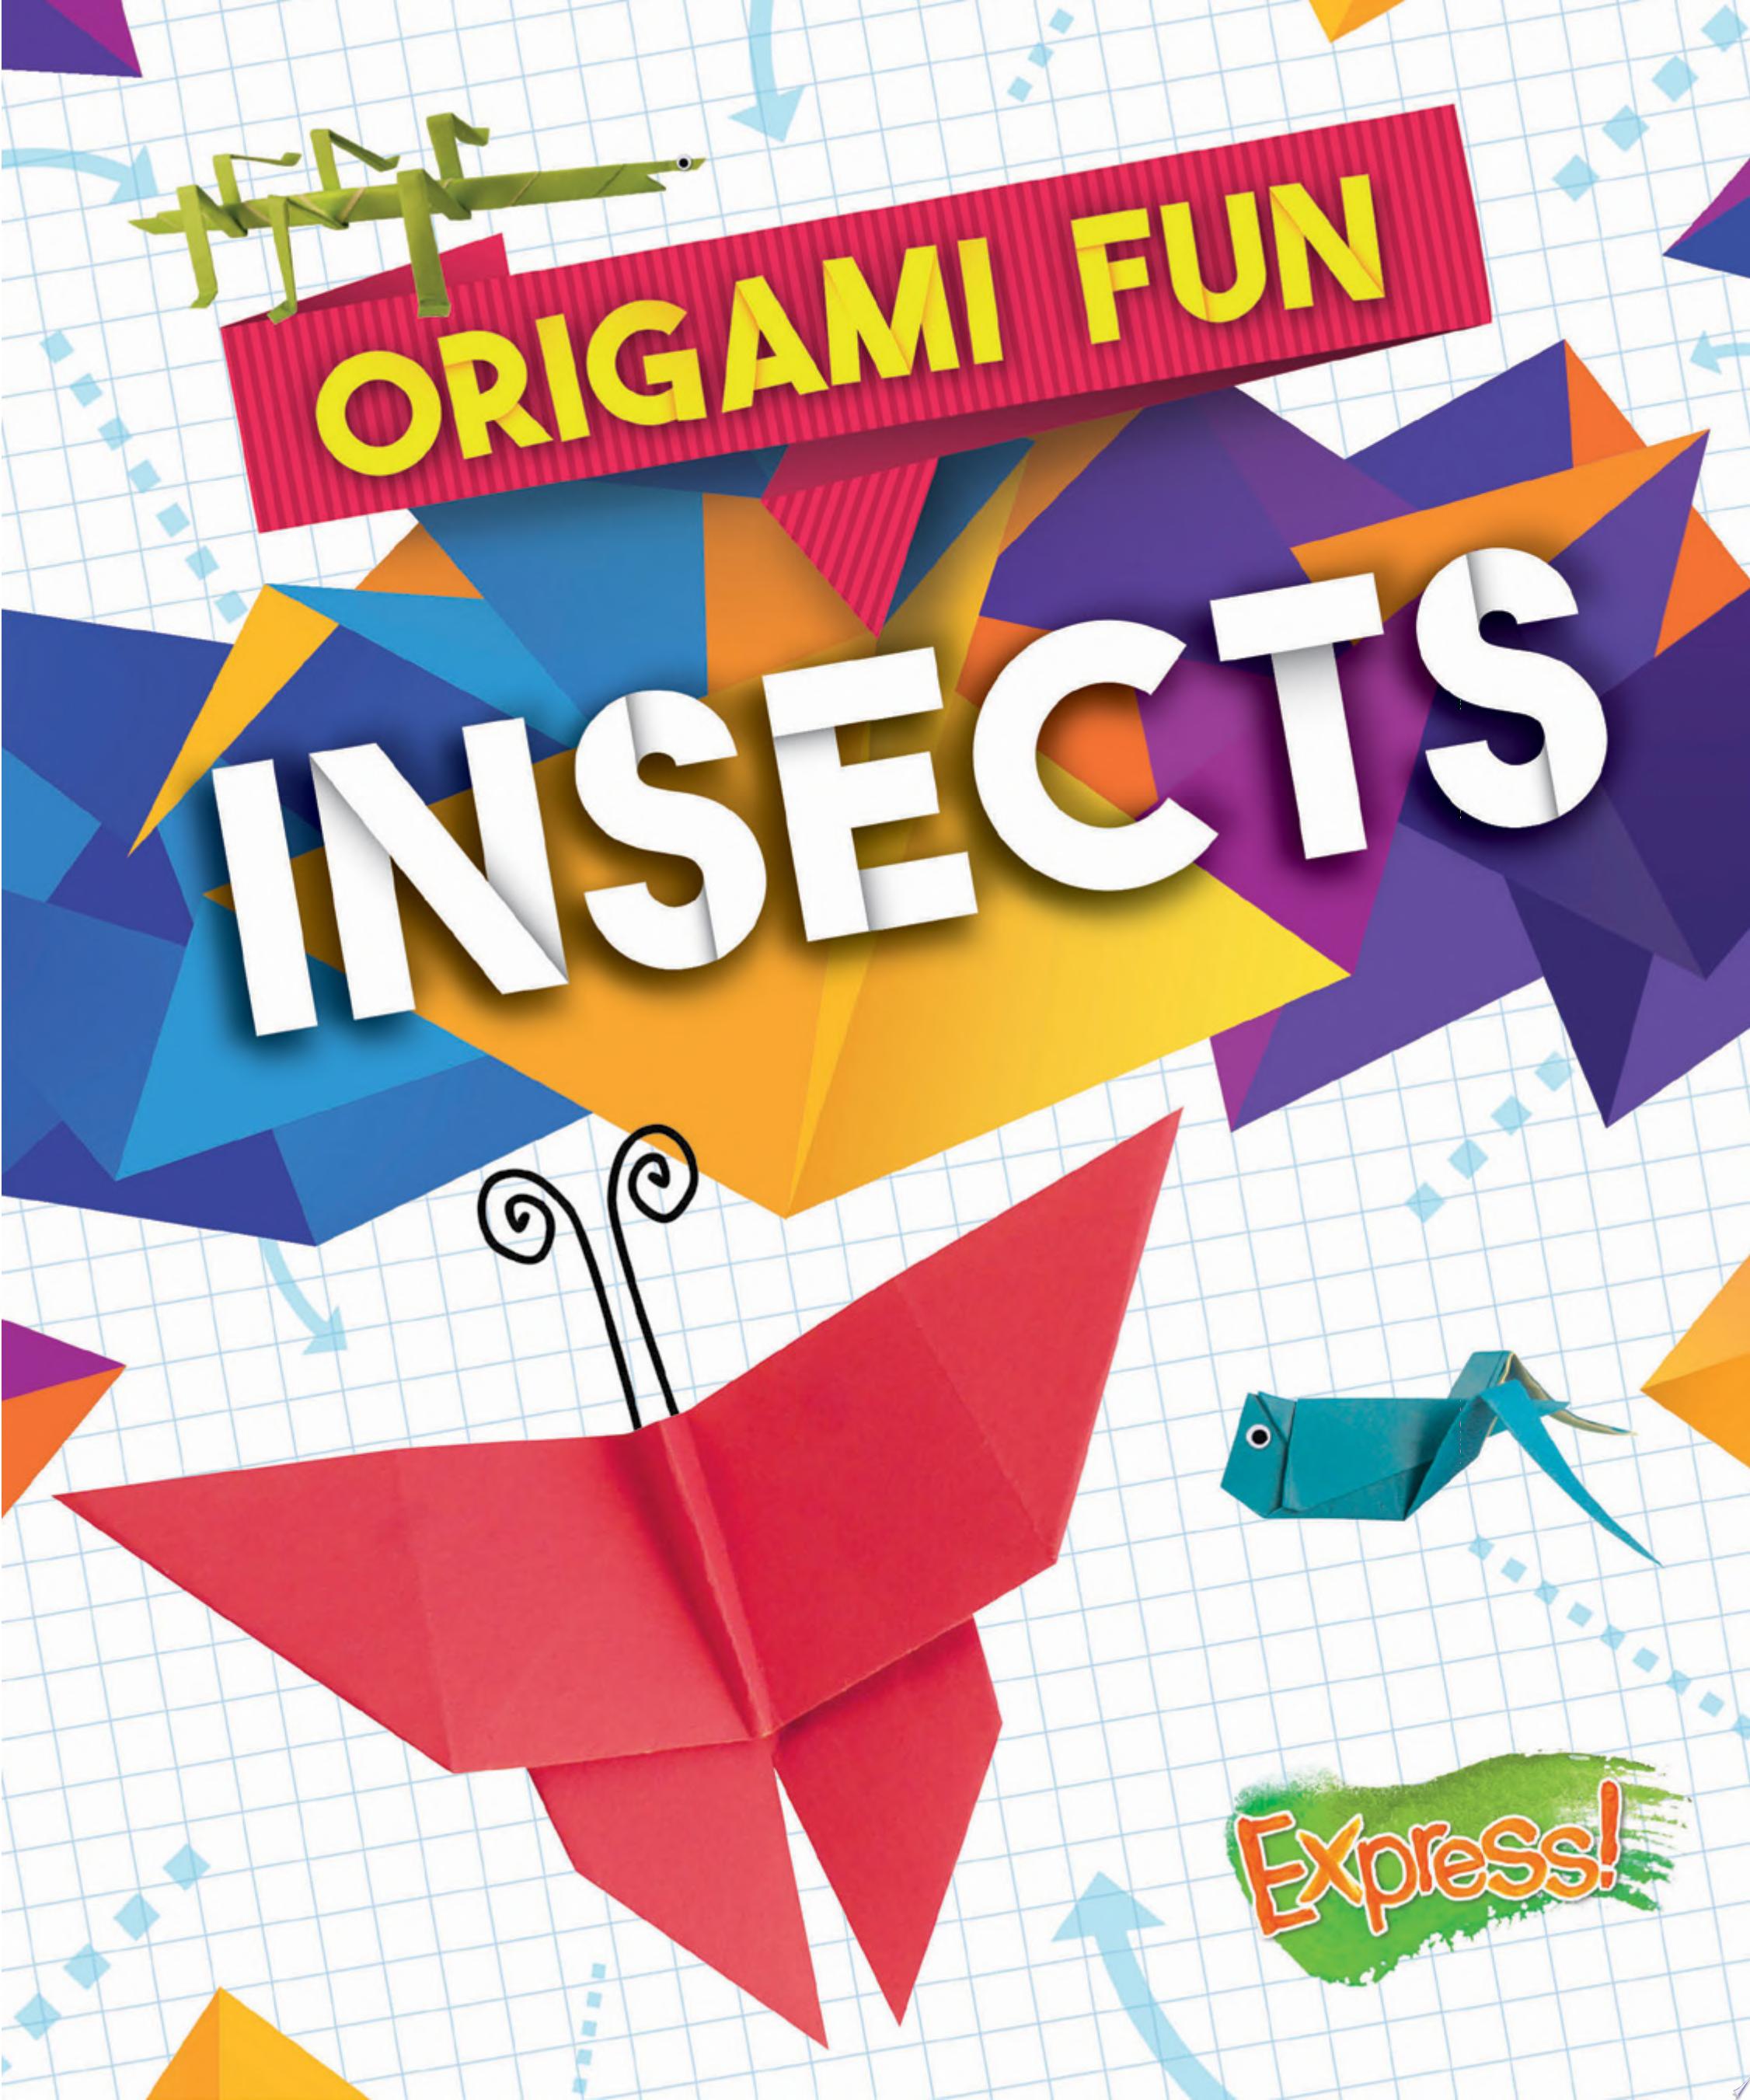 Image for "Origami Fun: Insects"